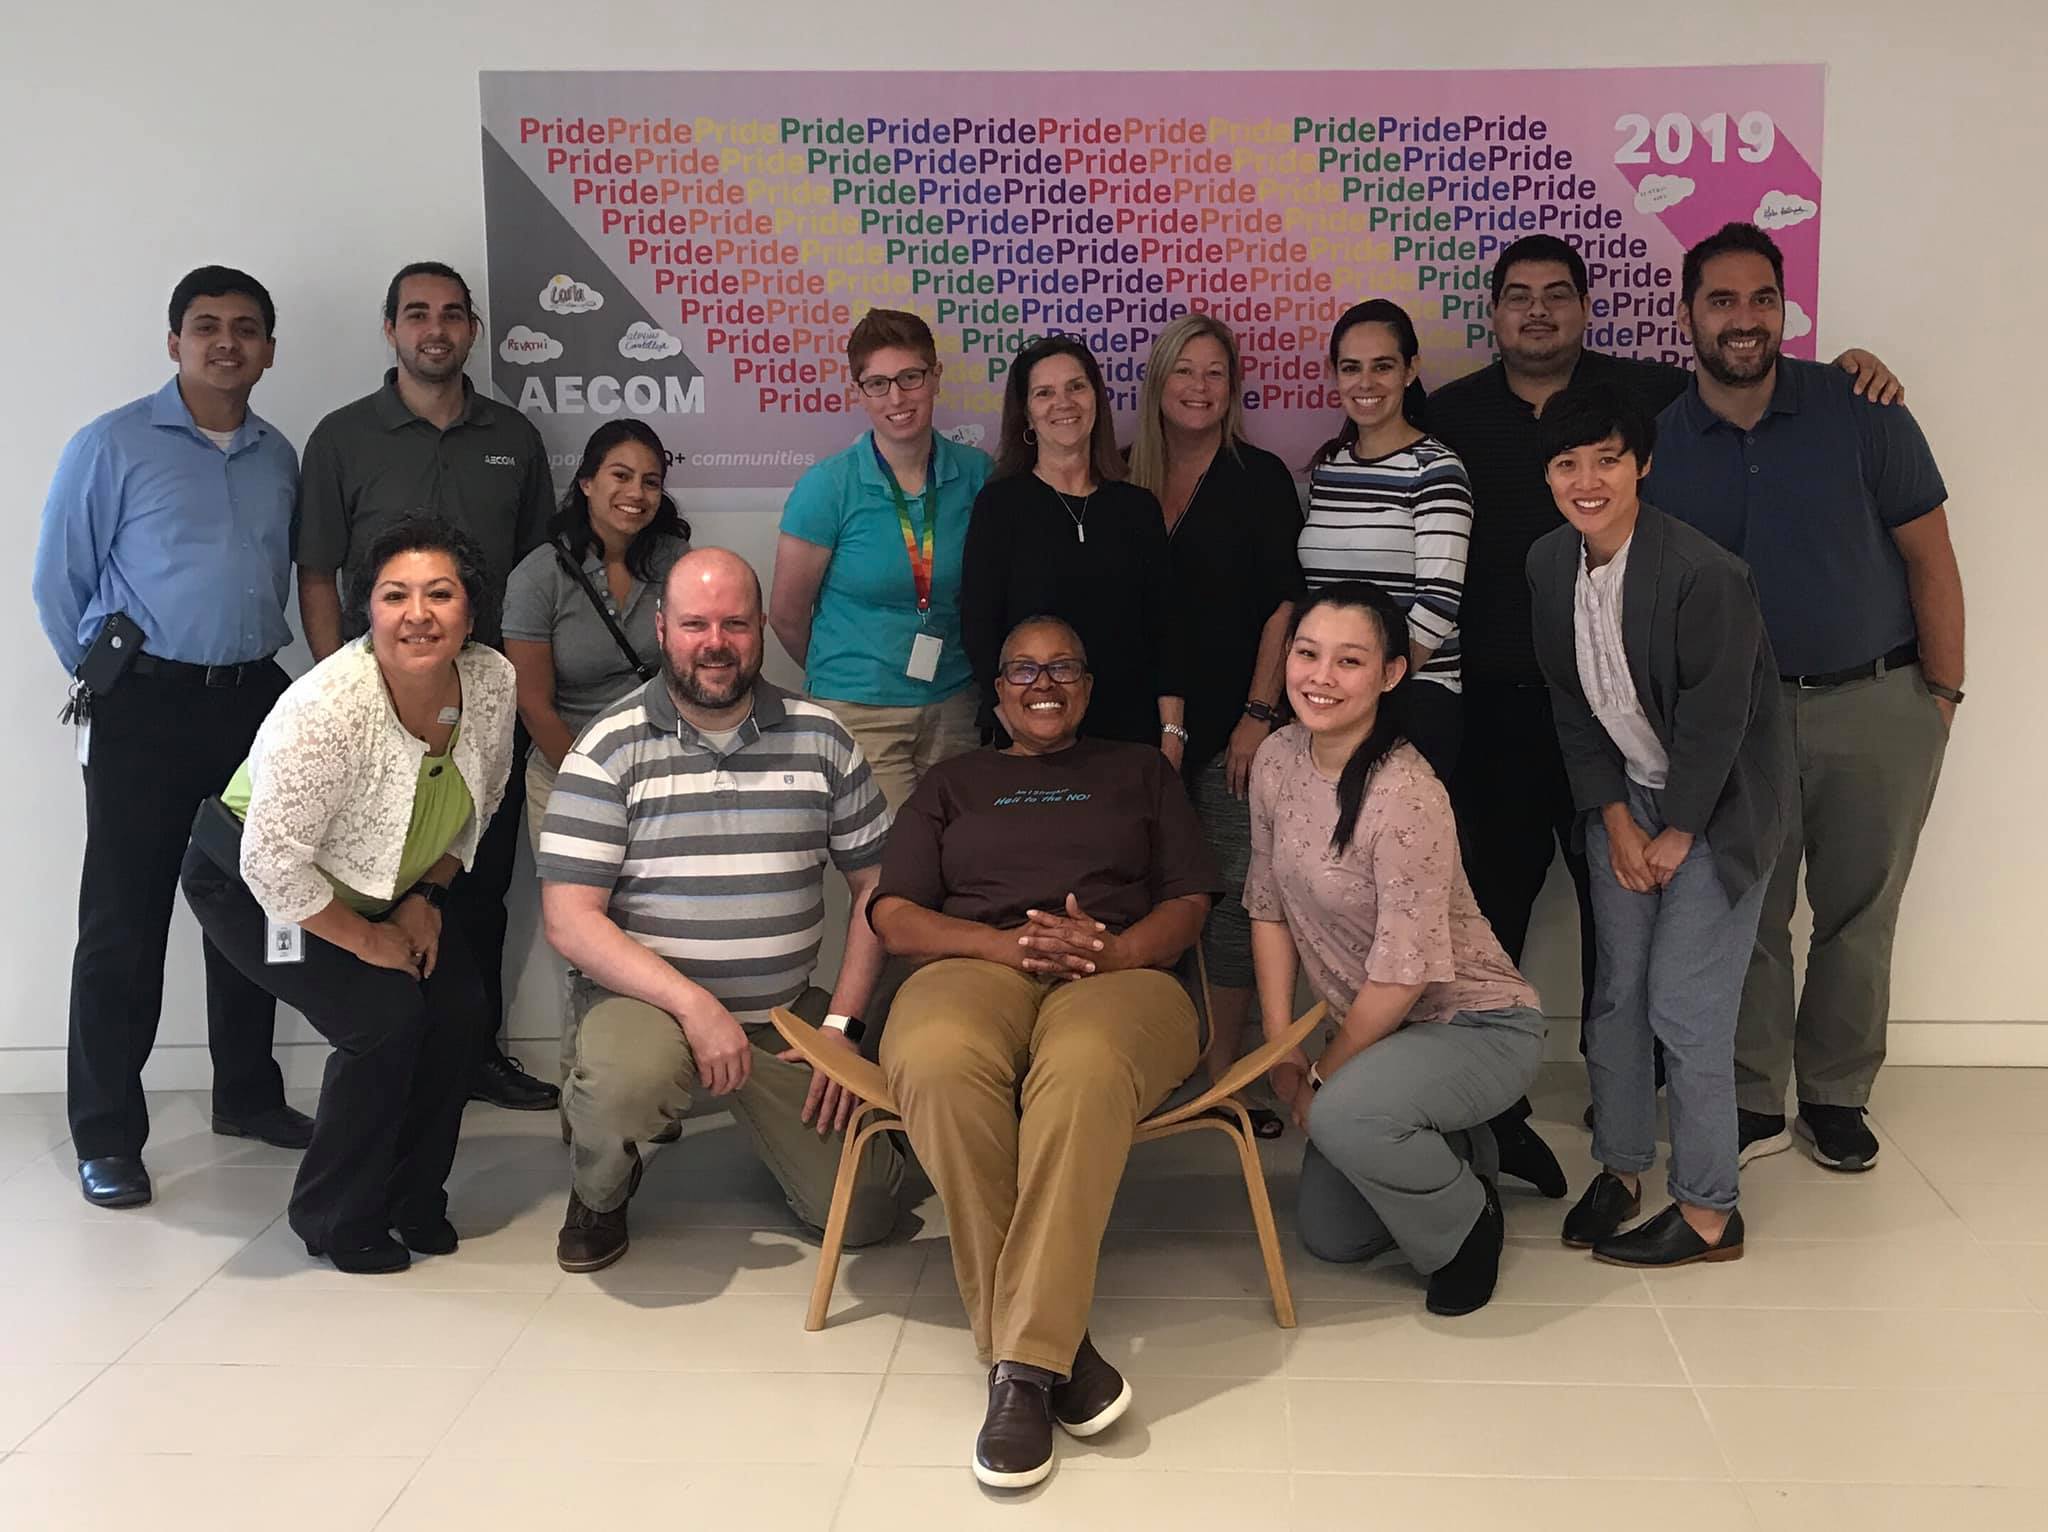   AECOM Employee PRIDE Group visiting with Silver Pride Project  